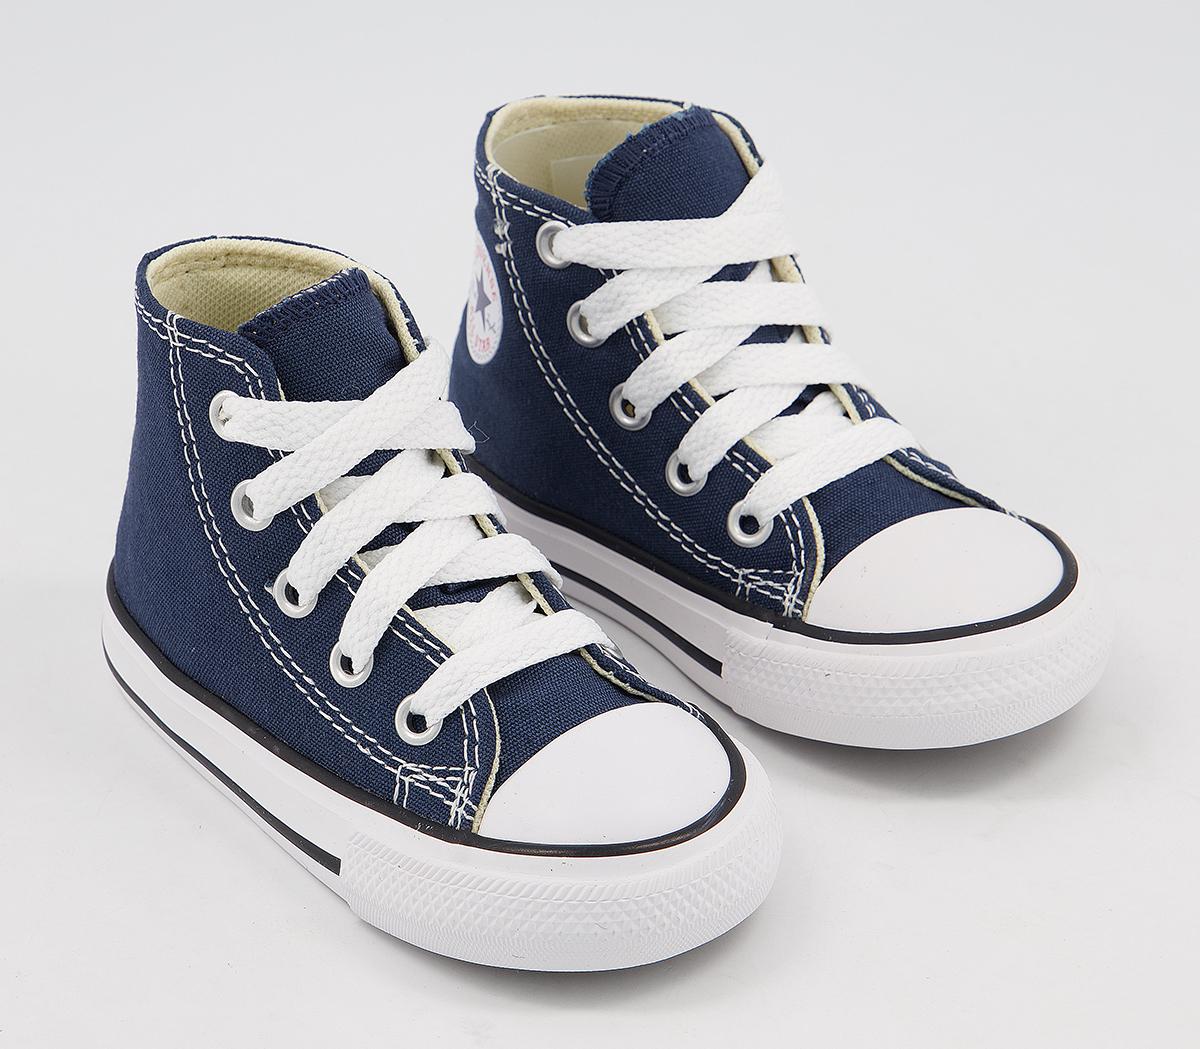 Kids Converse Baby Boys Small Star Hi Canvas Kids In Navy Blue And White, 3 Infant